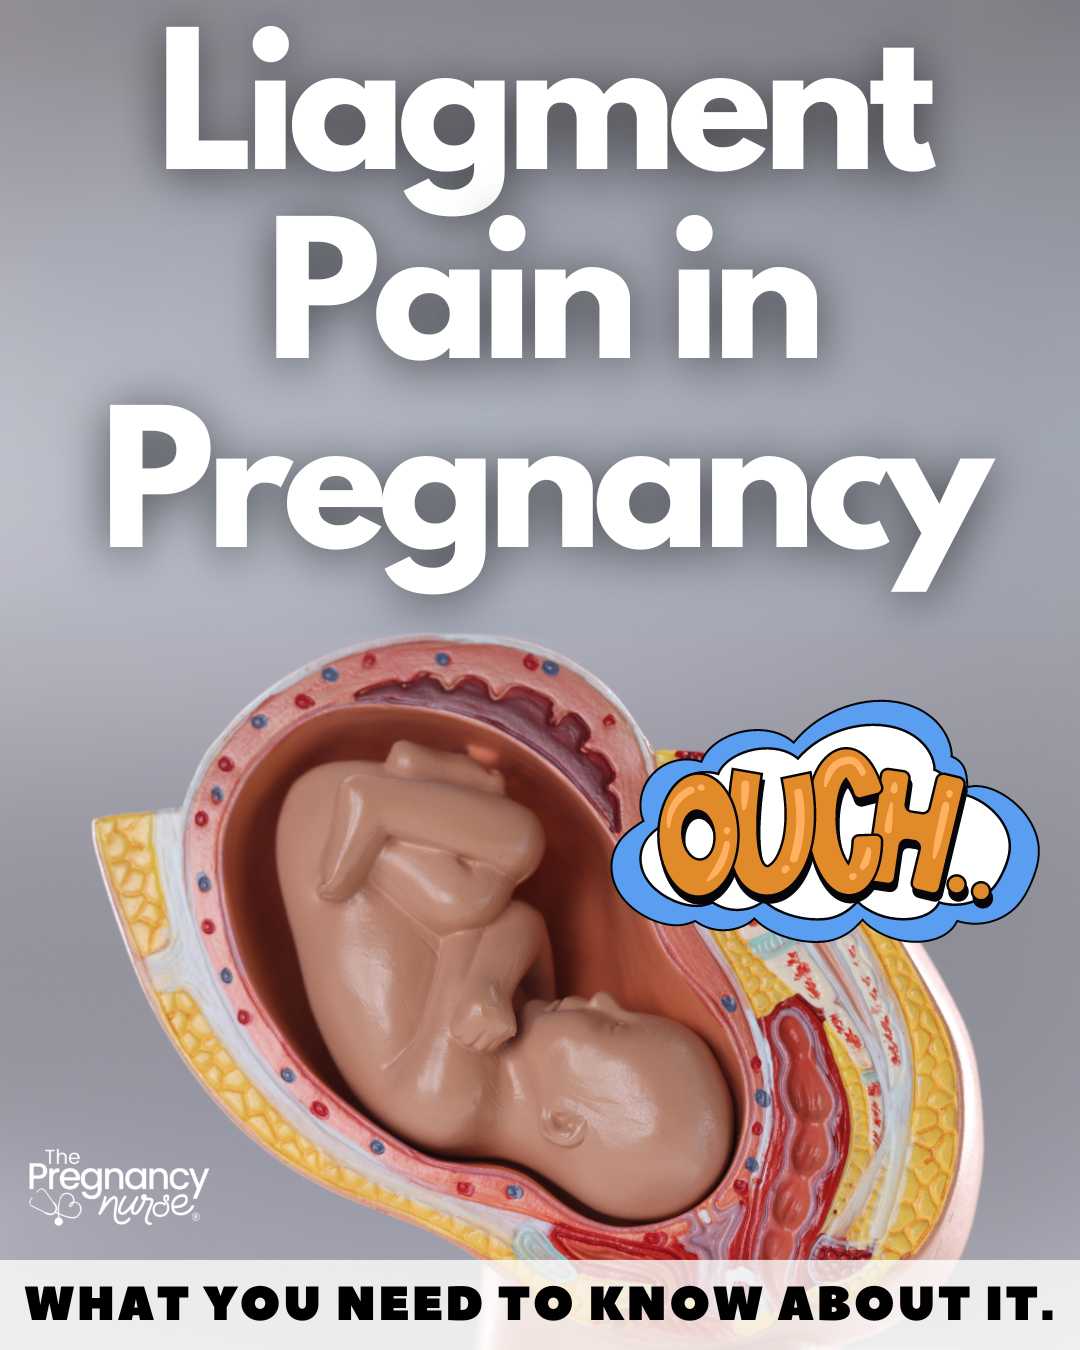 model of a pregnancy in an abdomen with the word "ouch" next to it -- "Ligament Pain in Pregnancy"